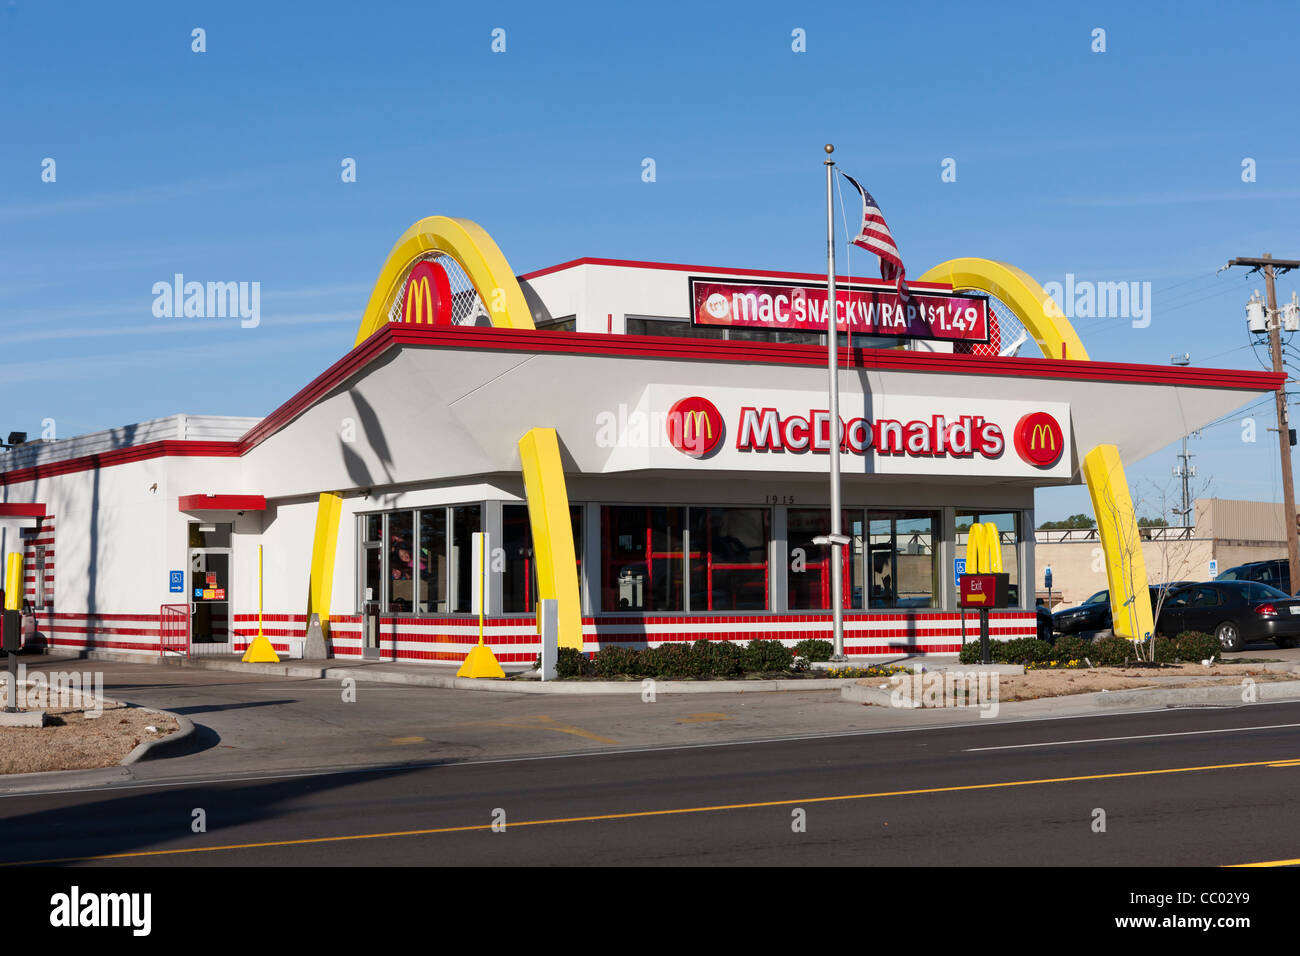 A drive-through McDonald's fast food restaurant renovated in a 1950's retro style in Jackson, Tennessee. Stock Photo